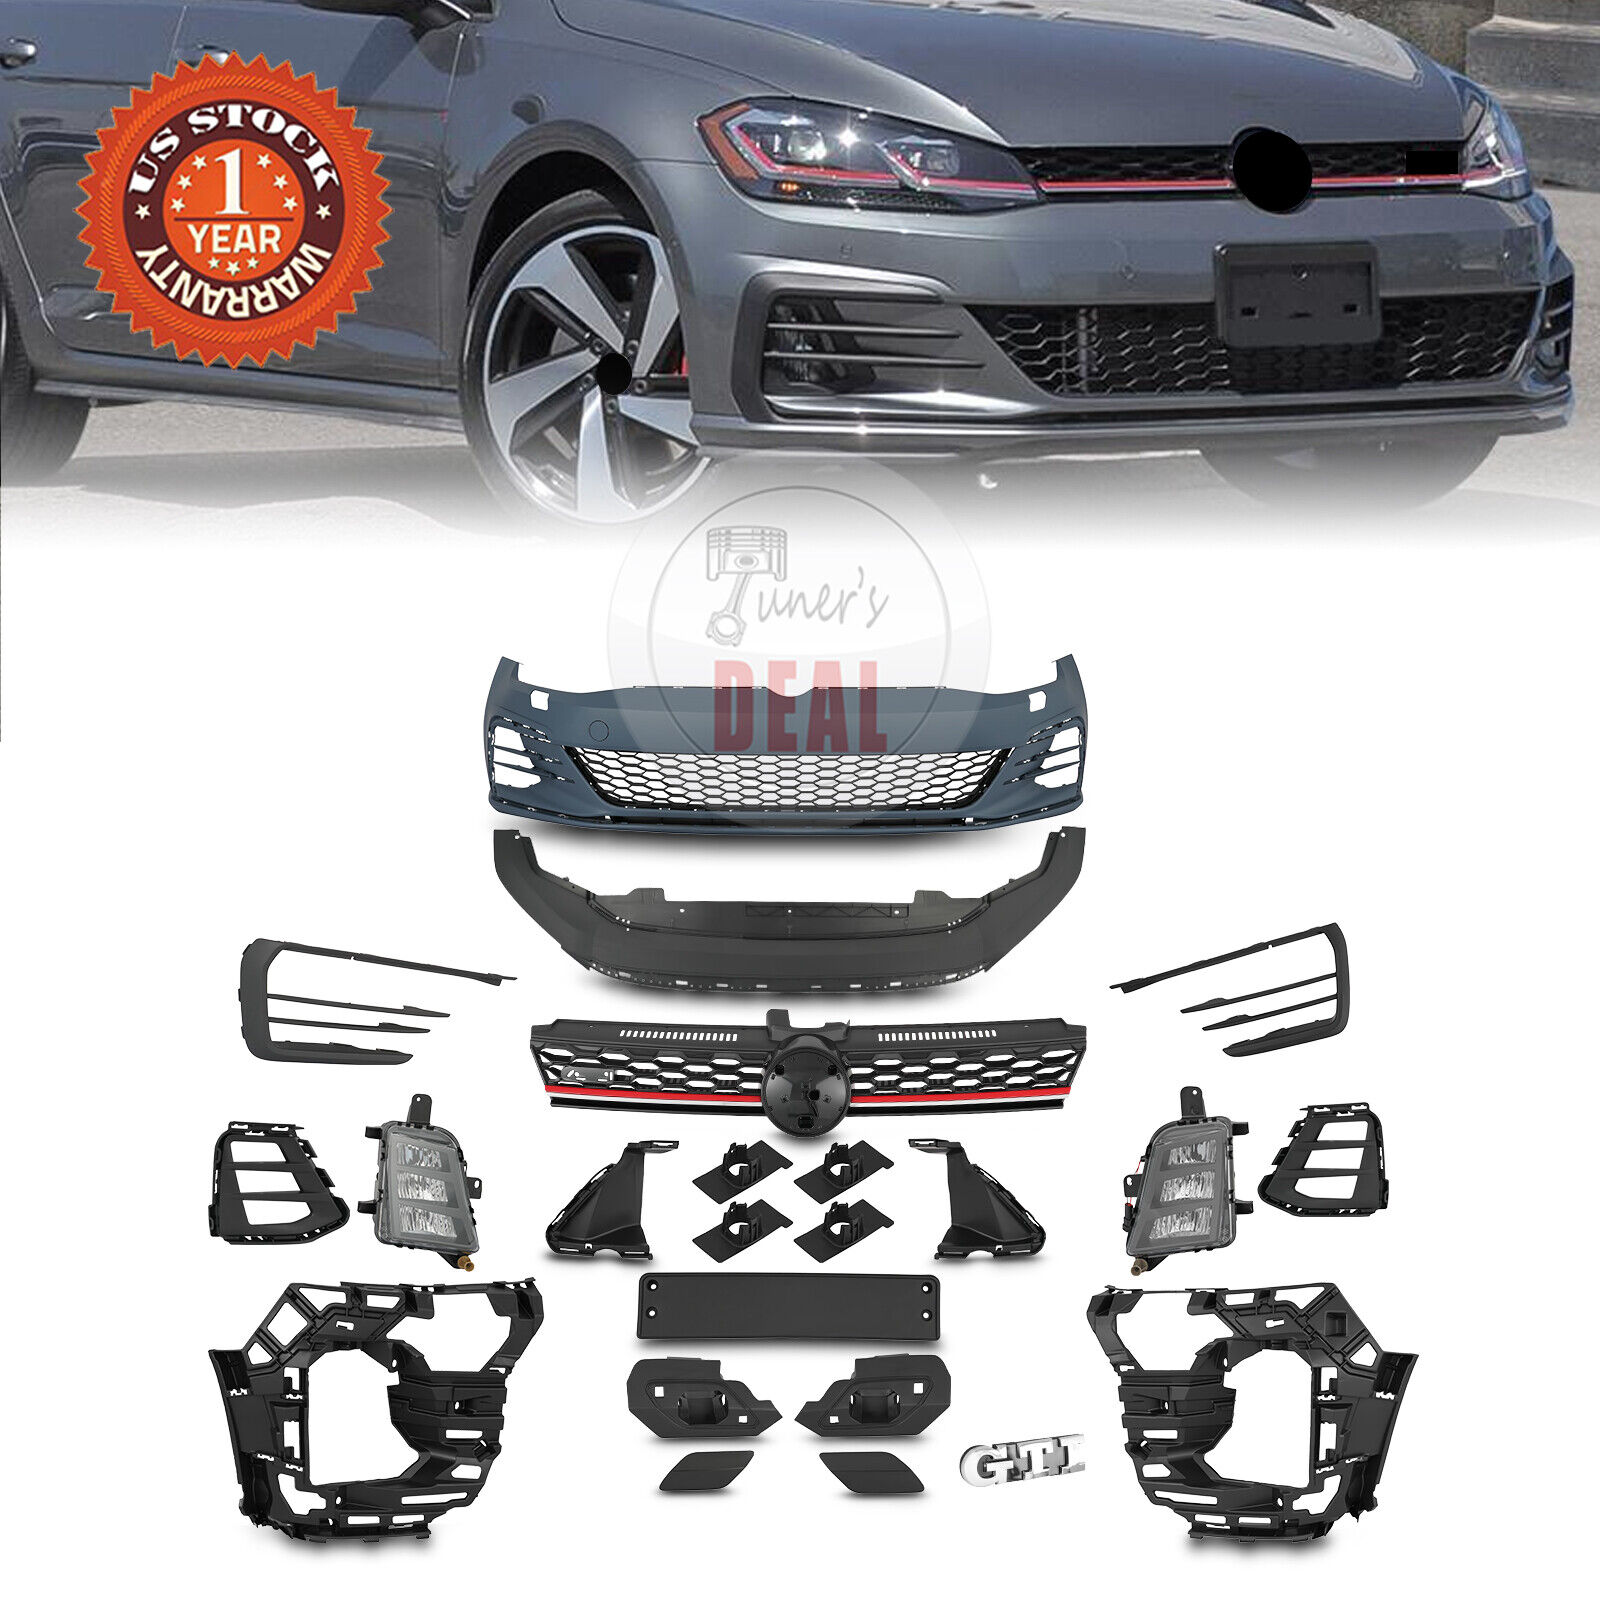 GTI Style Front Bumper Cover Kit Fits For 2017-2020 Volkswagen VW Golf 7.5 MK7.5